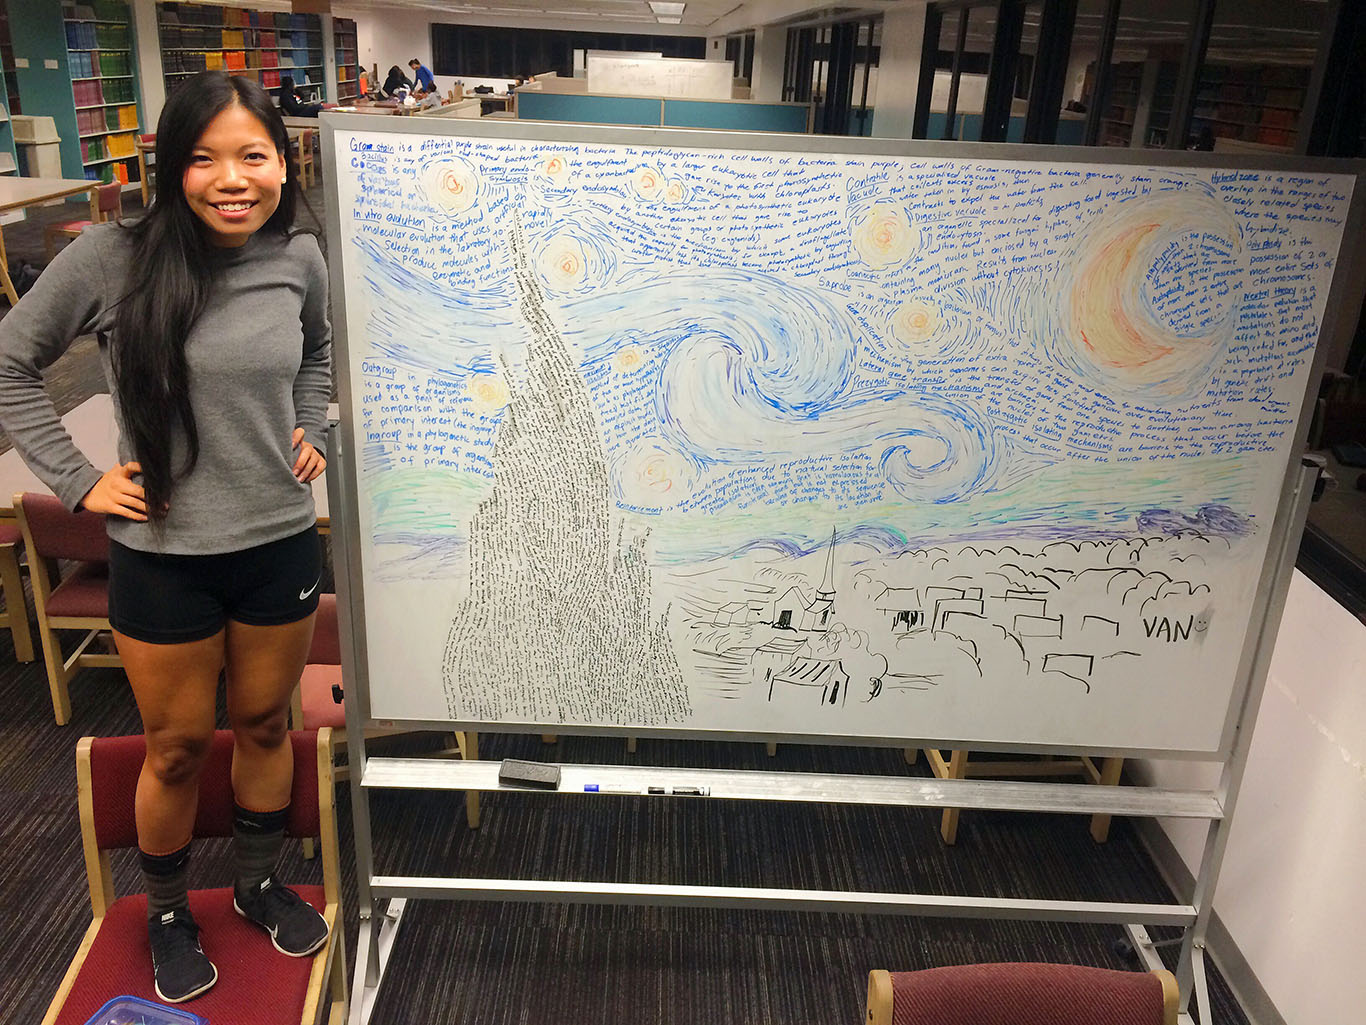 Van Truong standing next to her starry night artwork on a library whiteboard